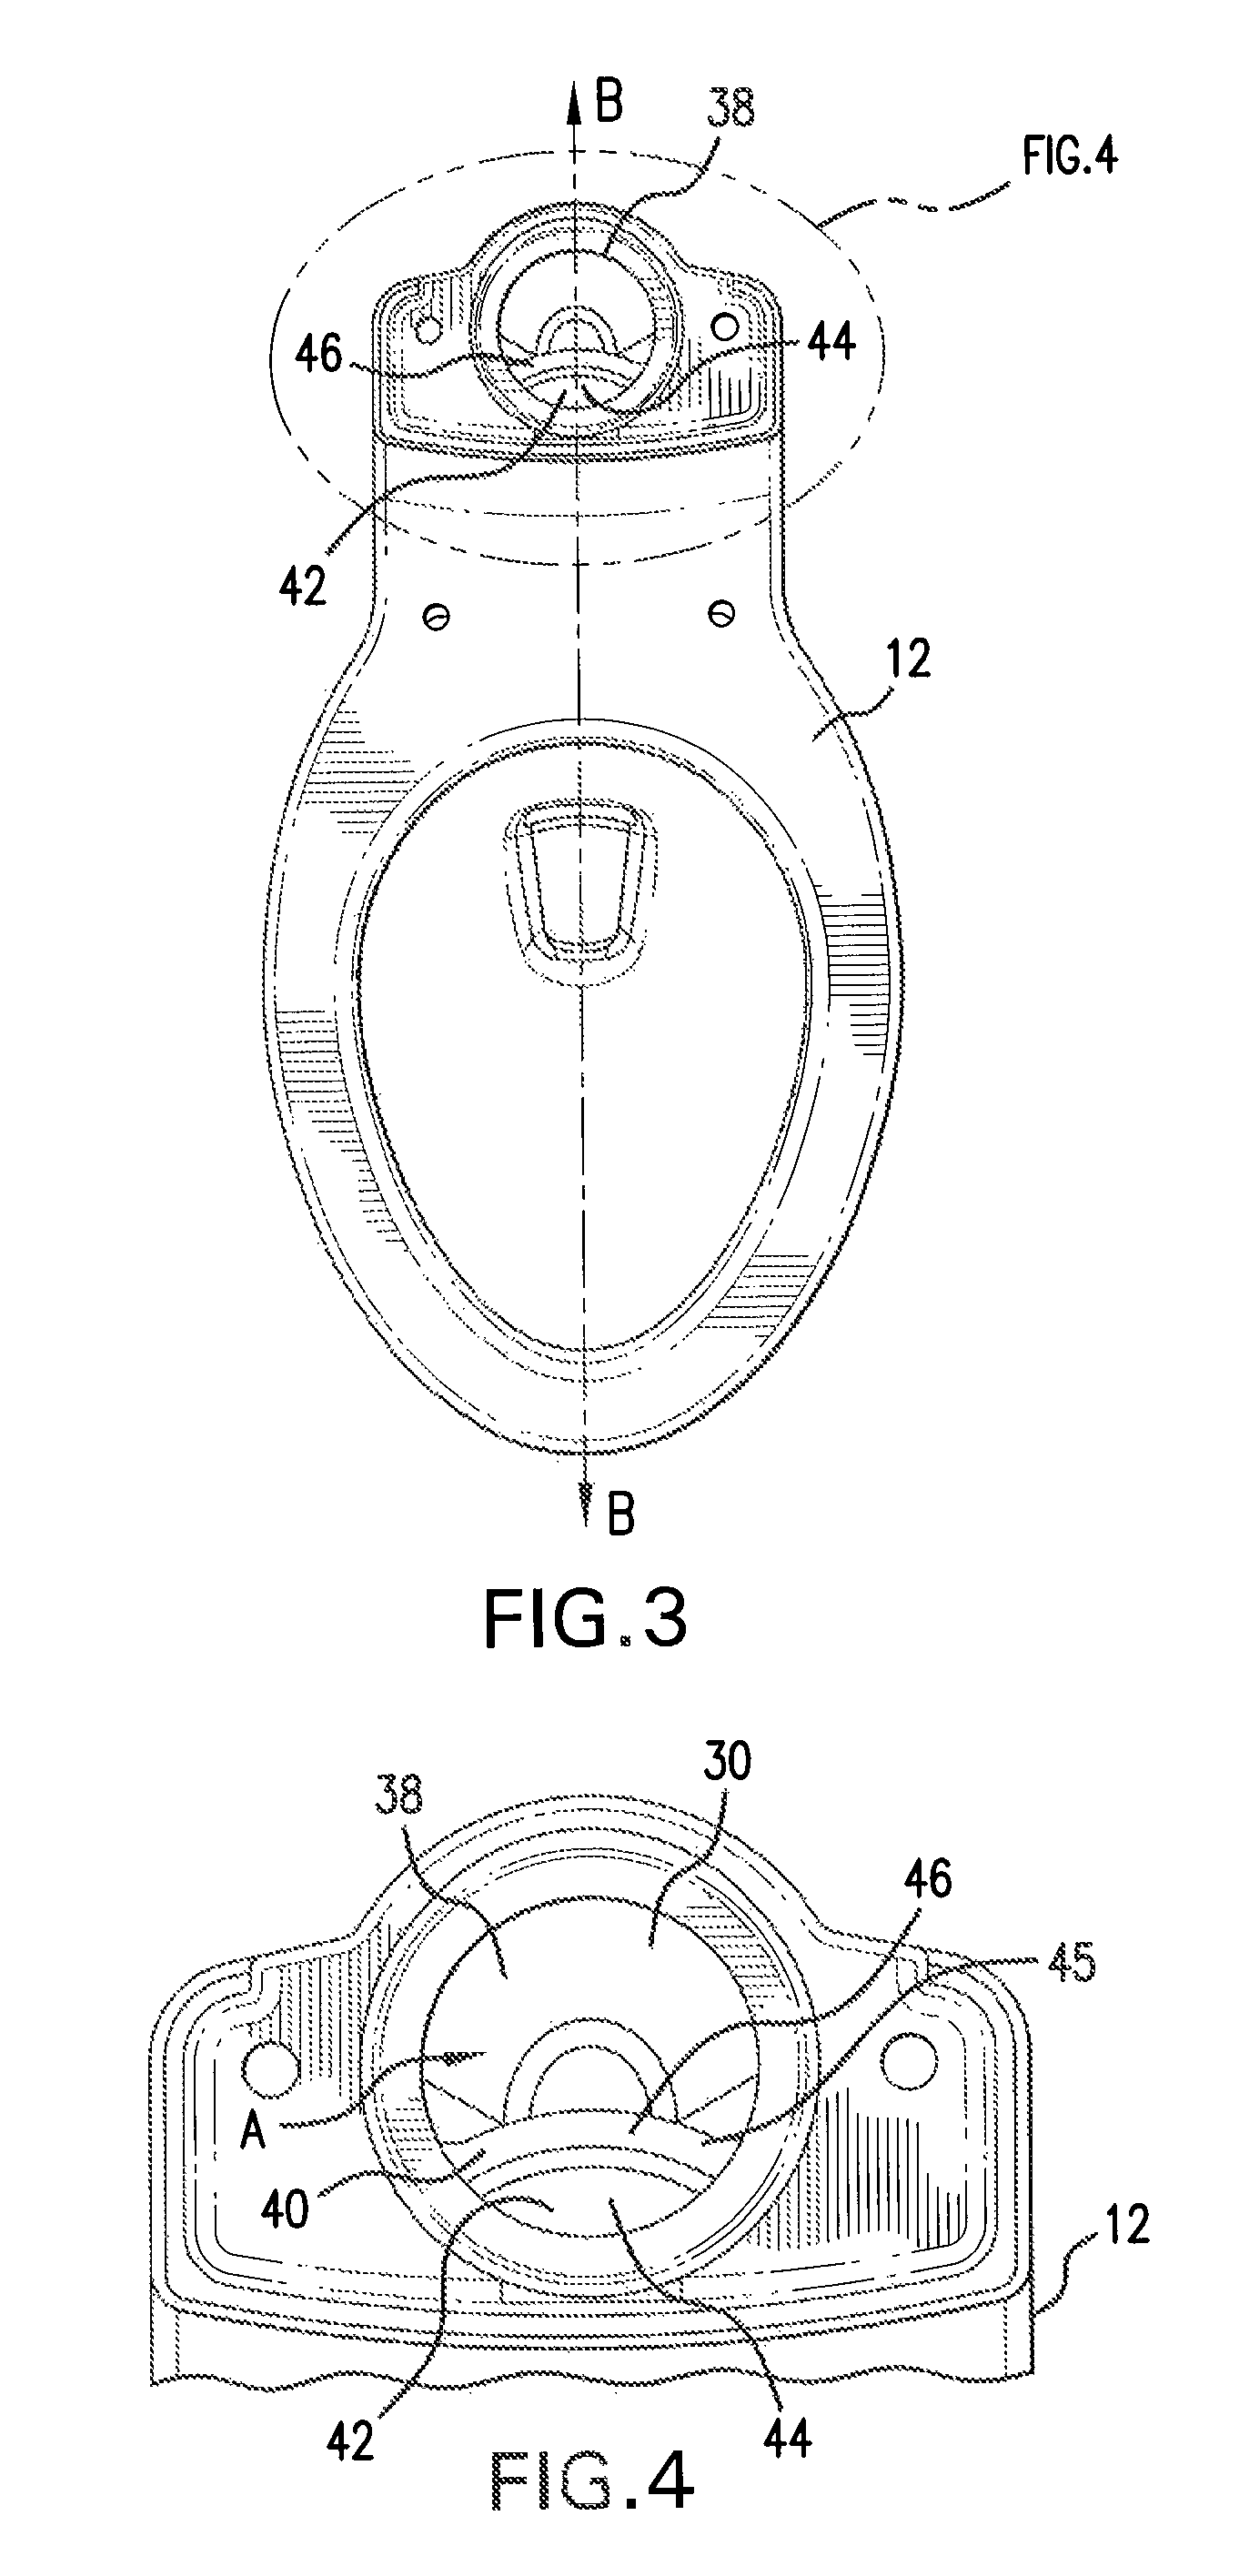 High performance toilet with rim-jet control capable of enhanced operation at reduced flush volumes